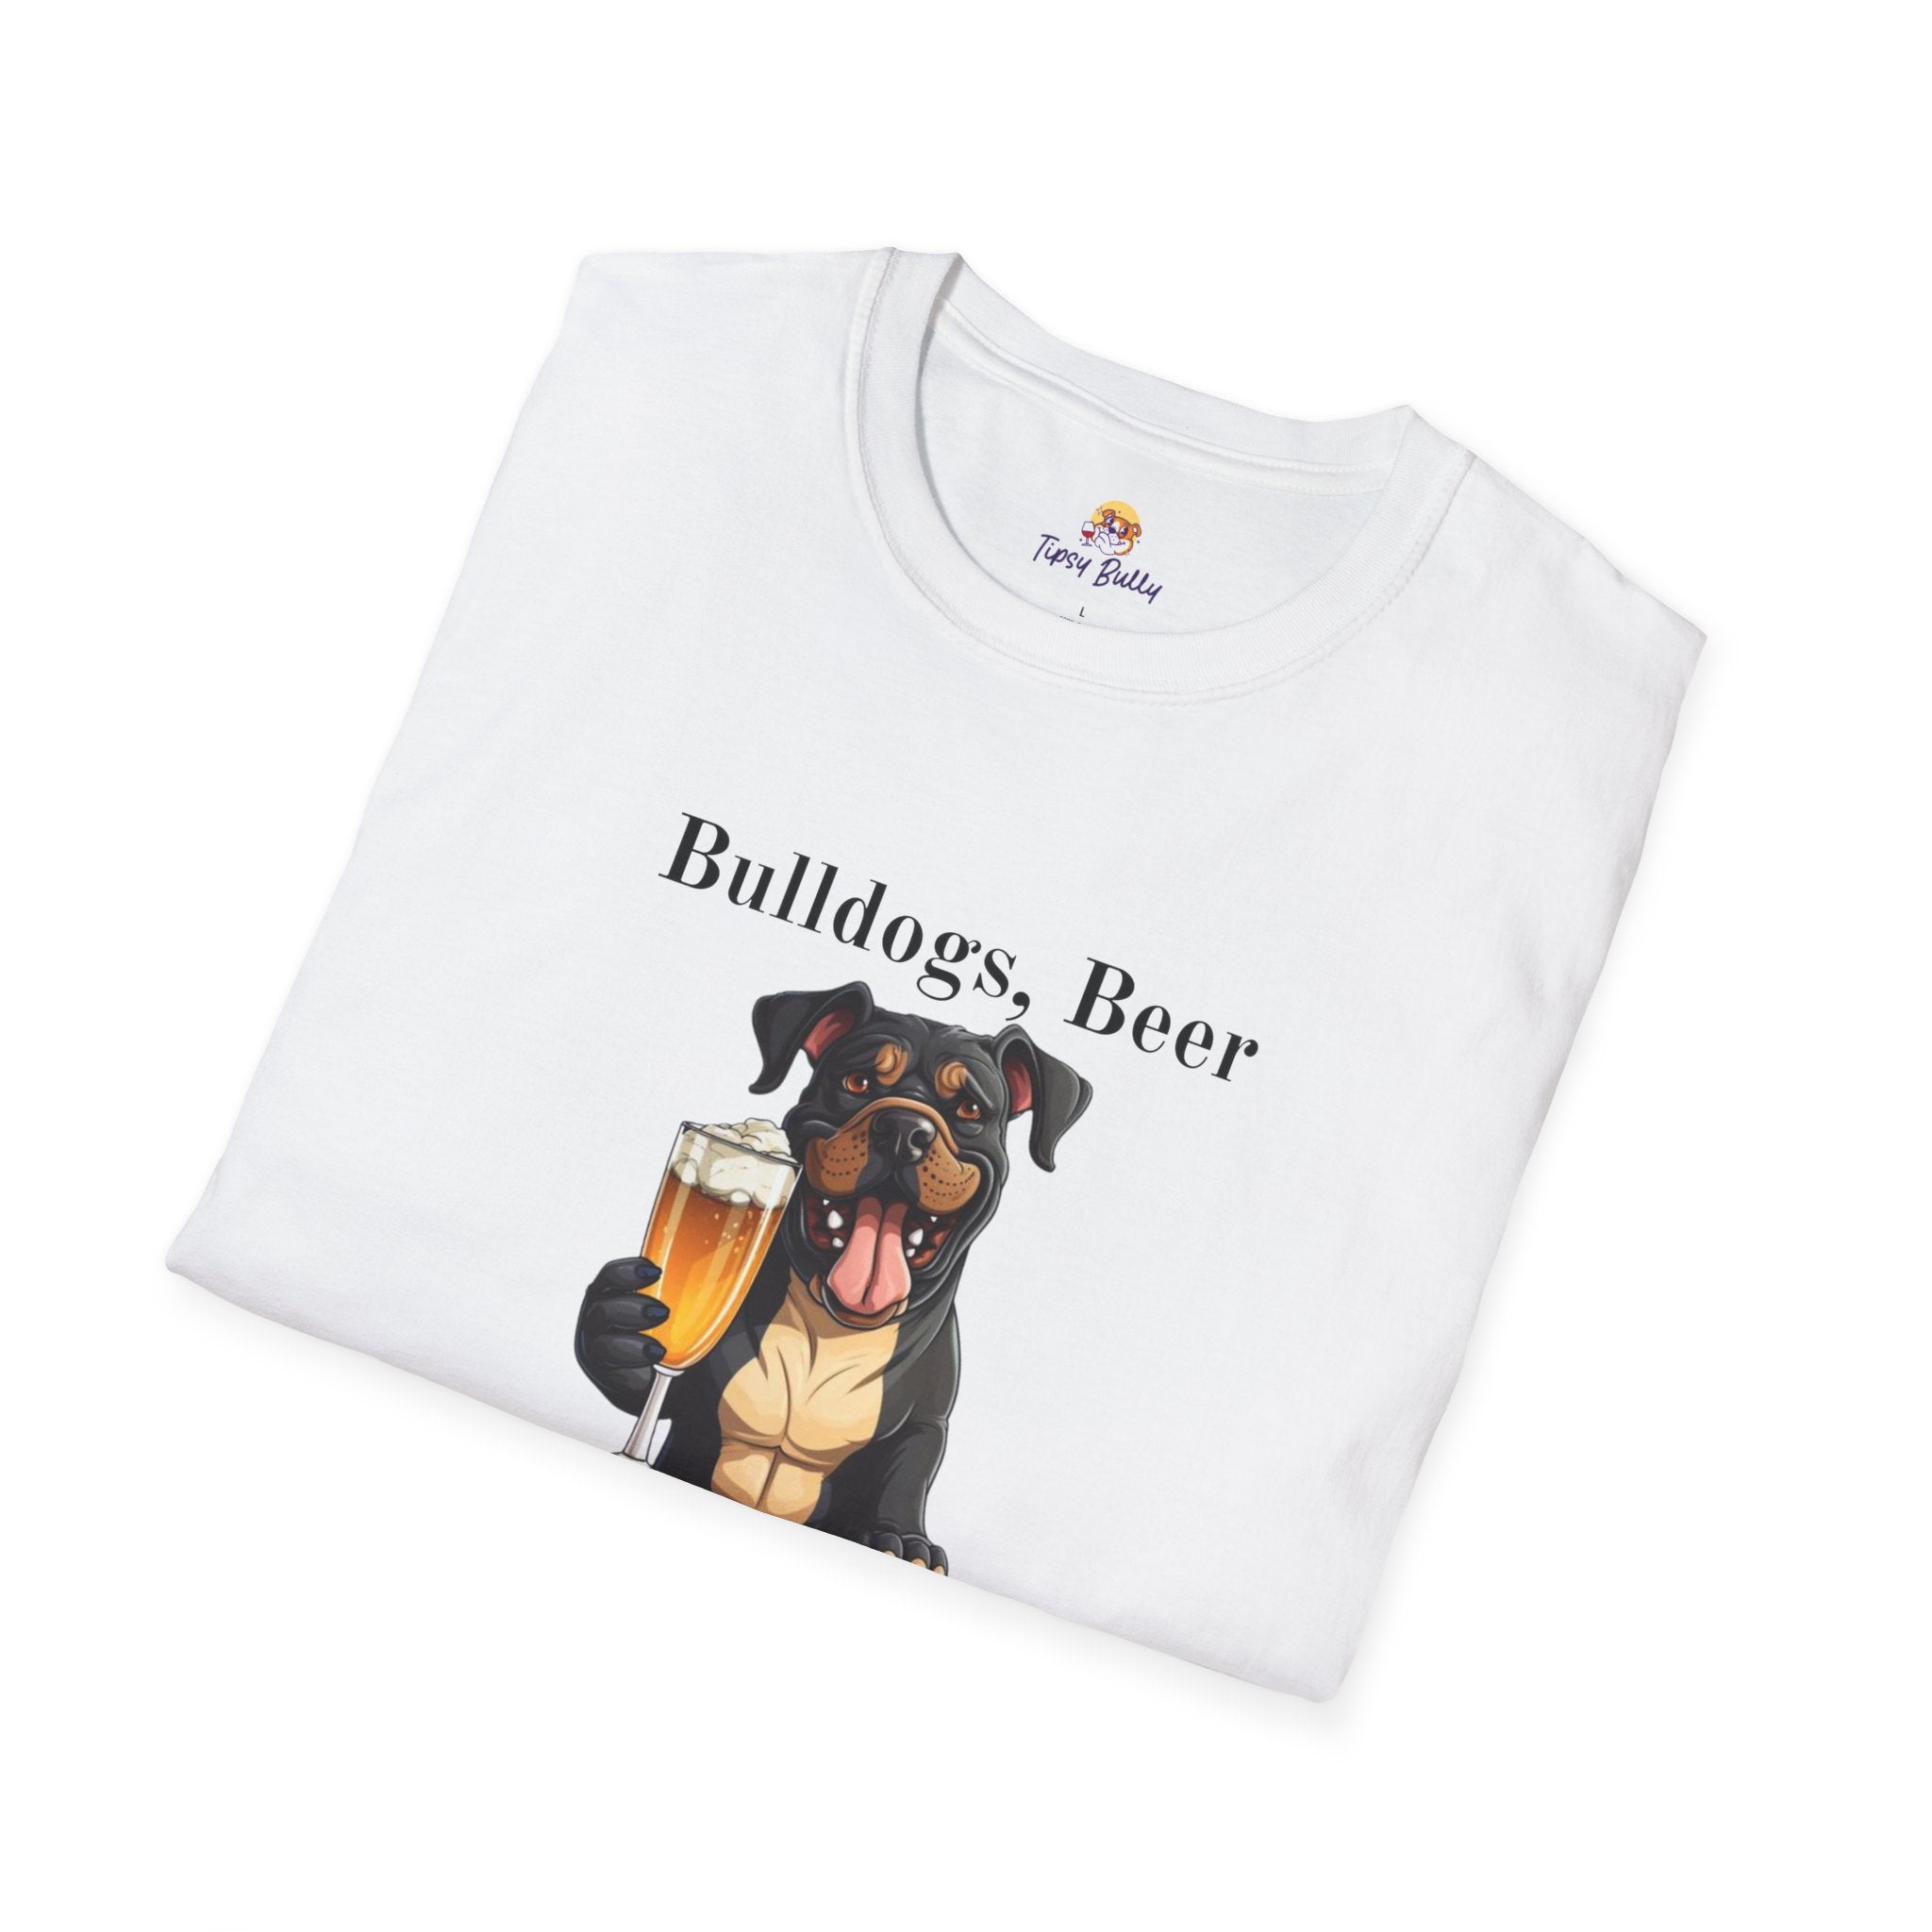 Bulldogs, Beer, and Bad Decisions" Unisex T-Shirt by Tipsy Bully (American/Black)